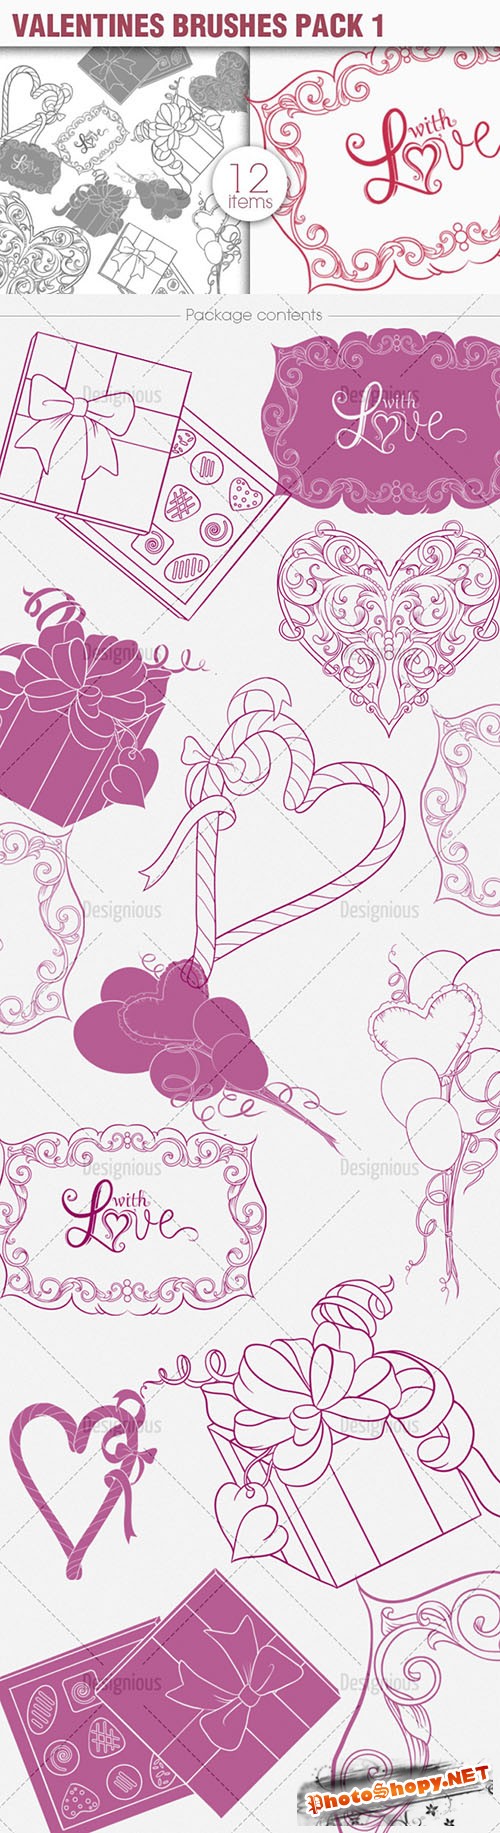 Valentines Day Photoshop Brushes Pack 1